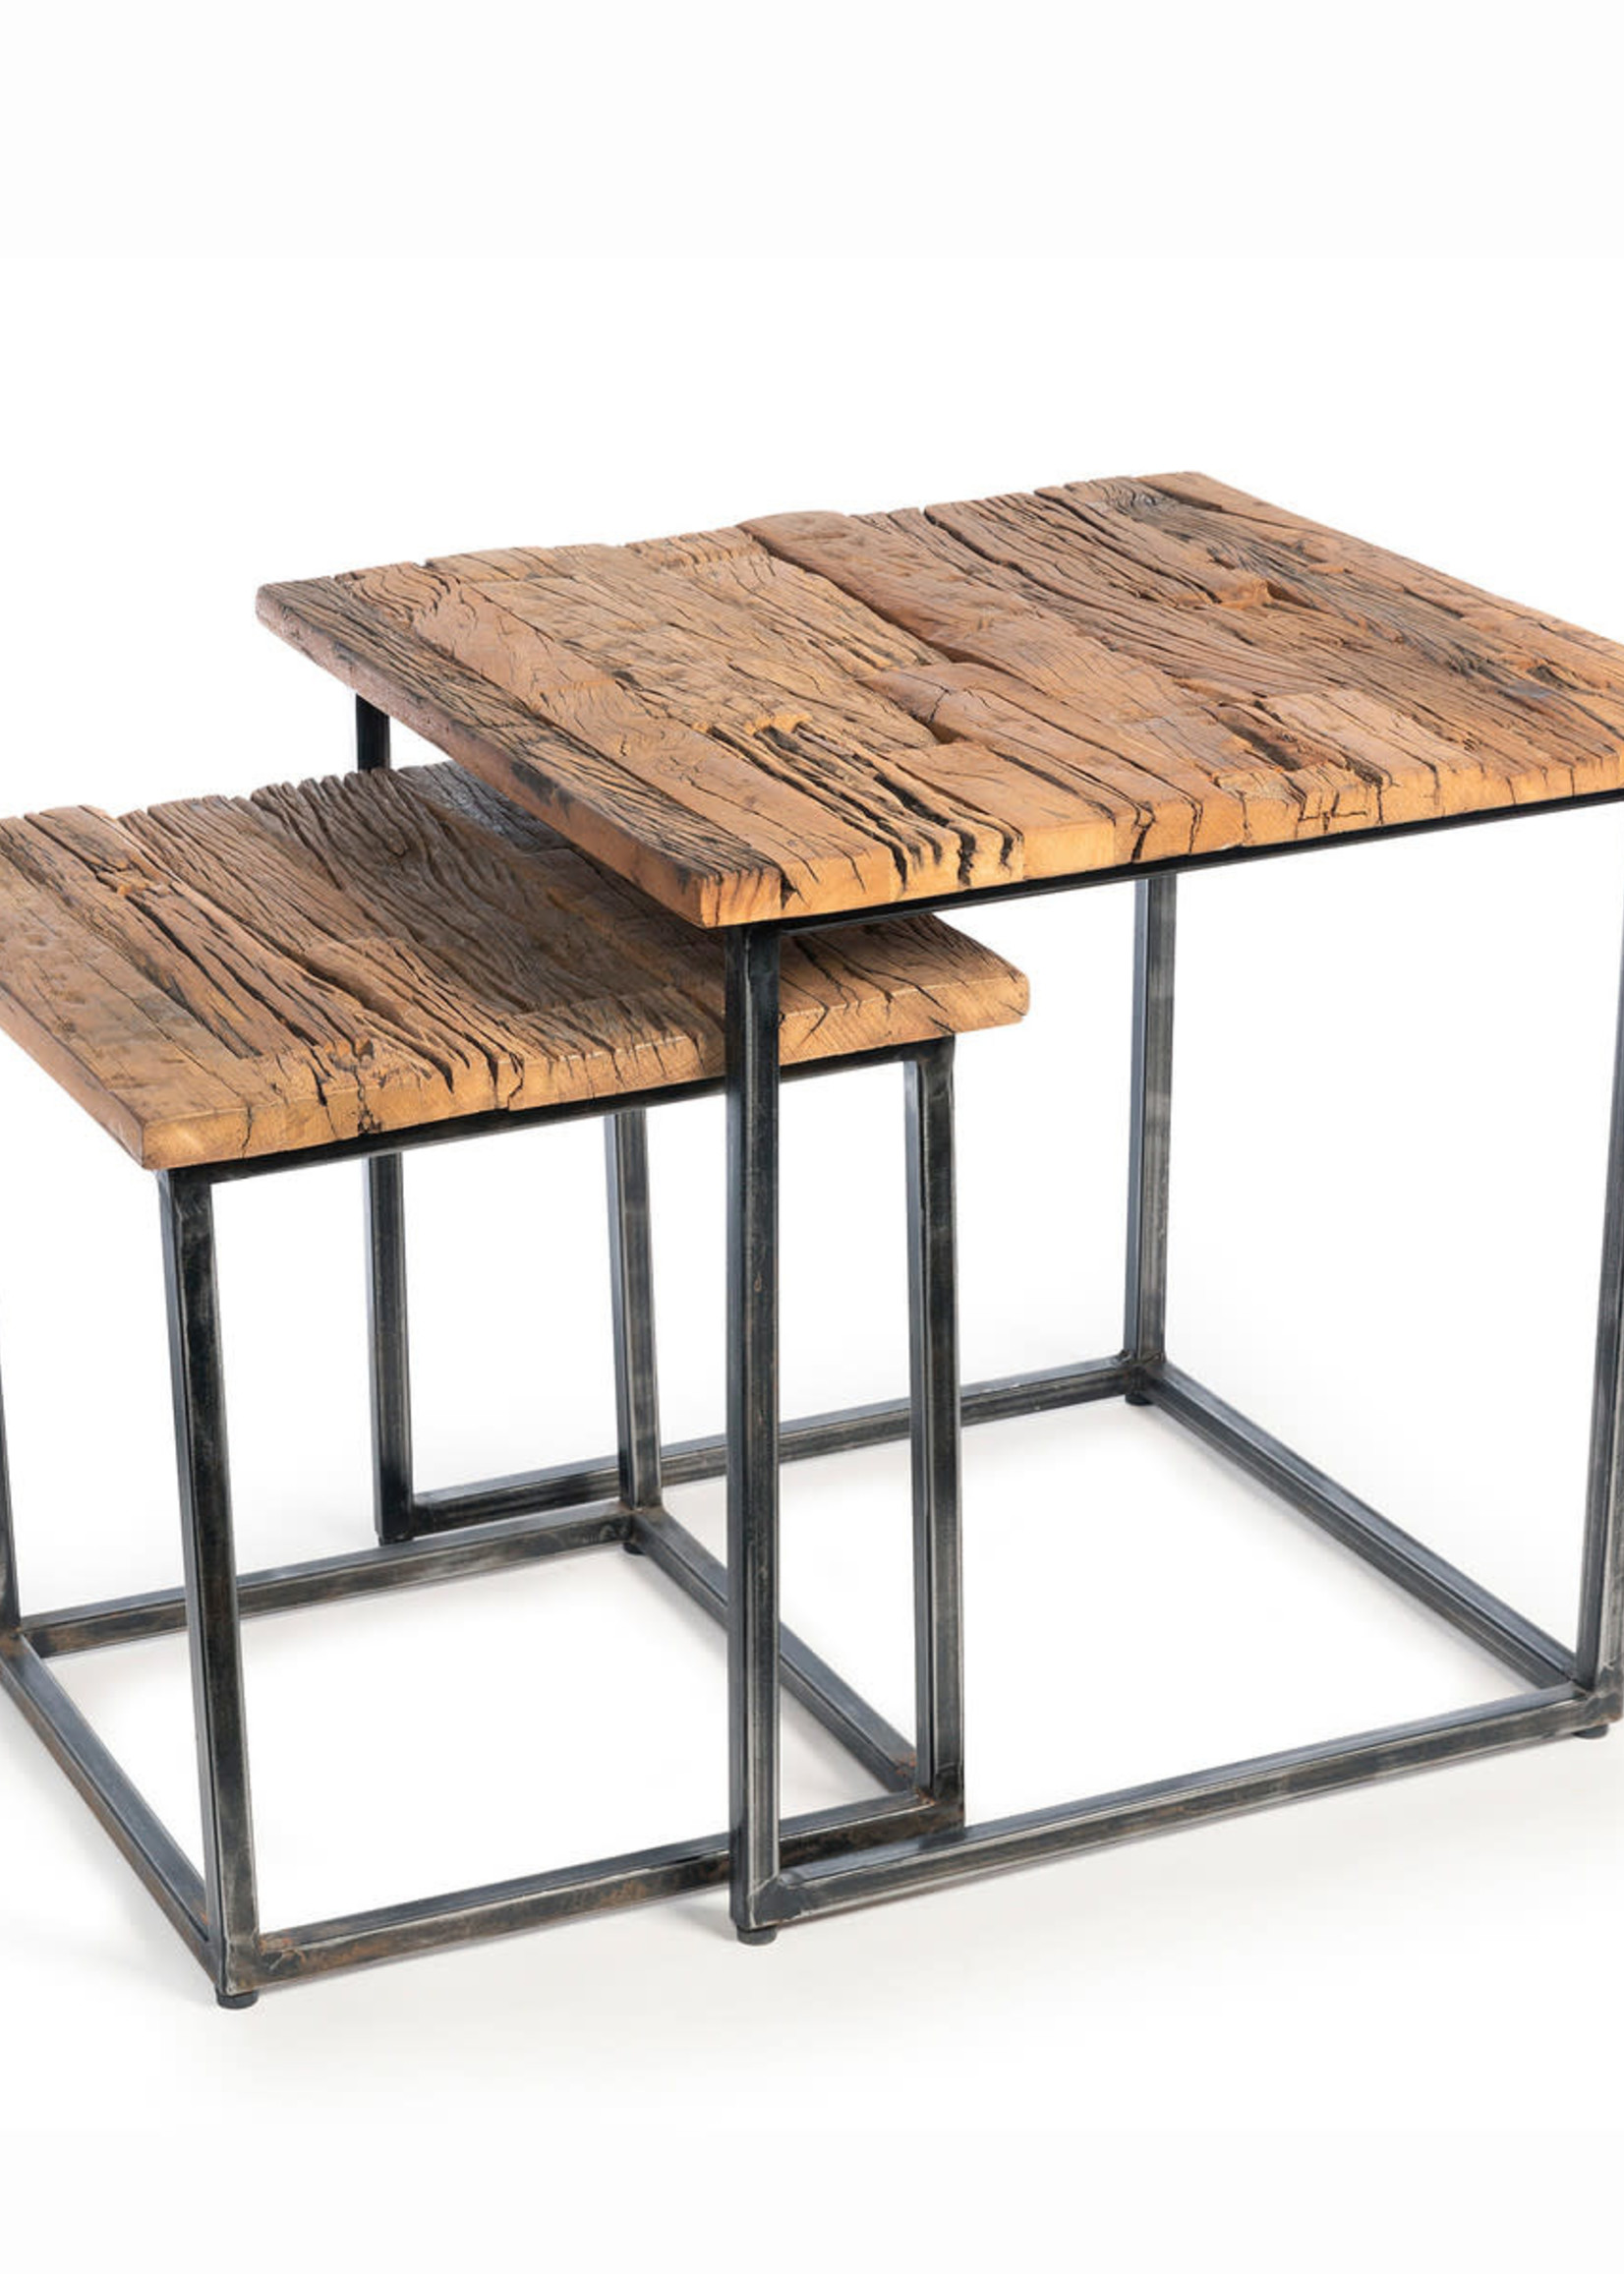 Design Decor Railway Wood and Iron Nested Side Tables